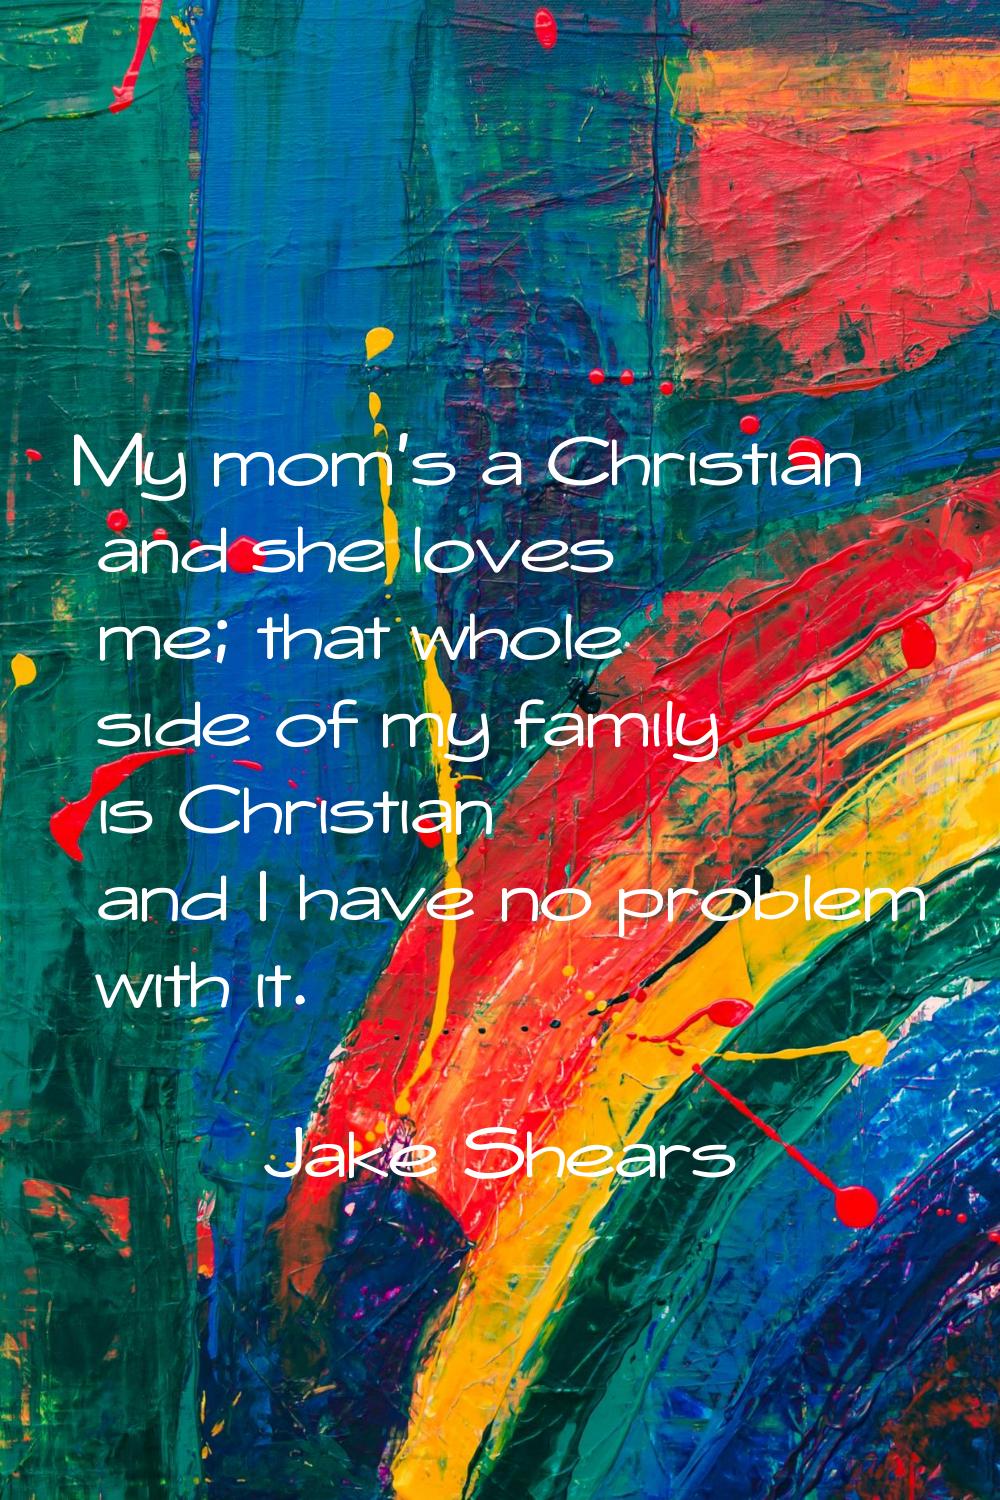 My mom's a Christian and she loves me; that whole side of my family is Christian and I have no prob